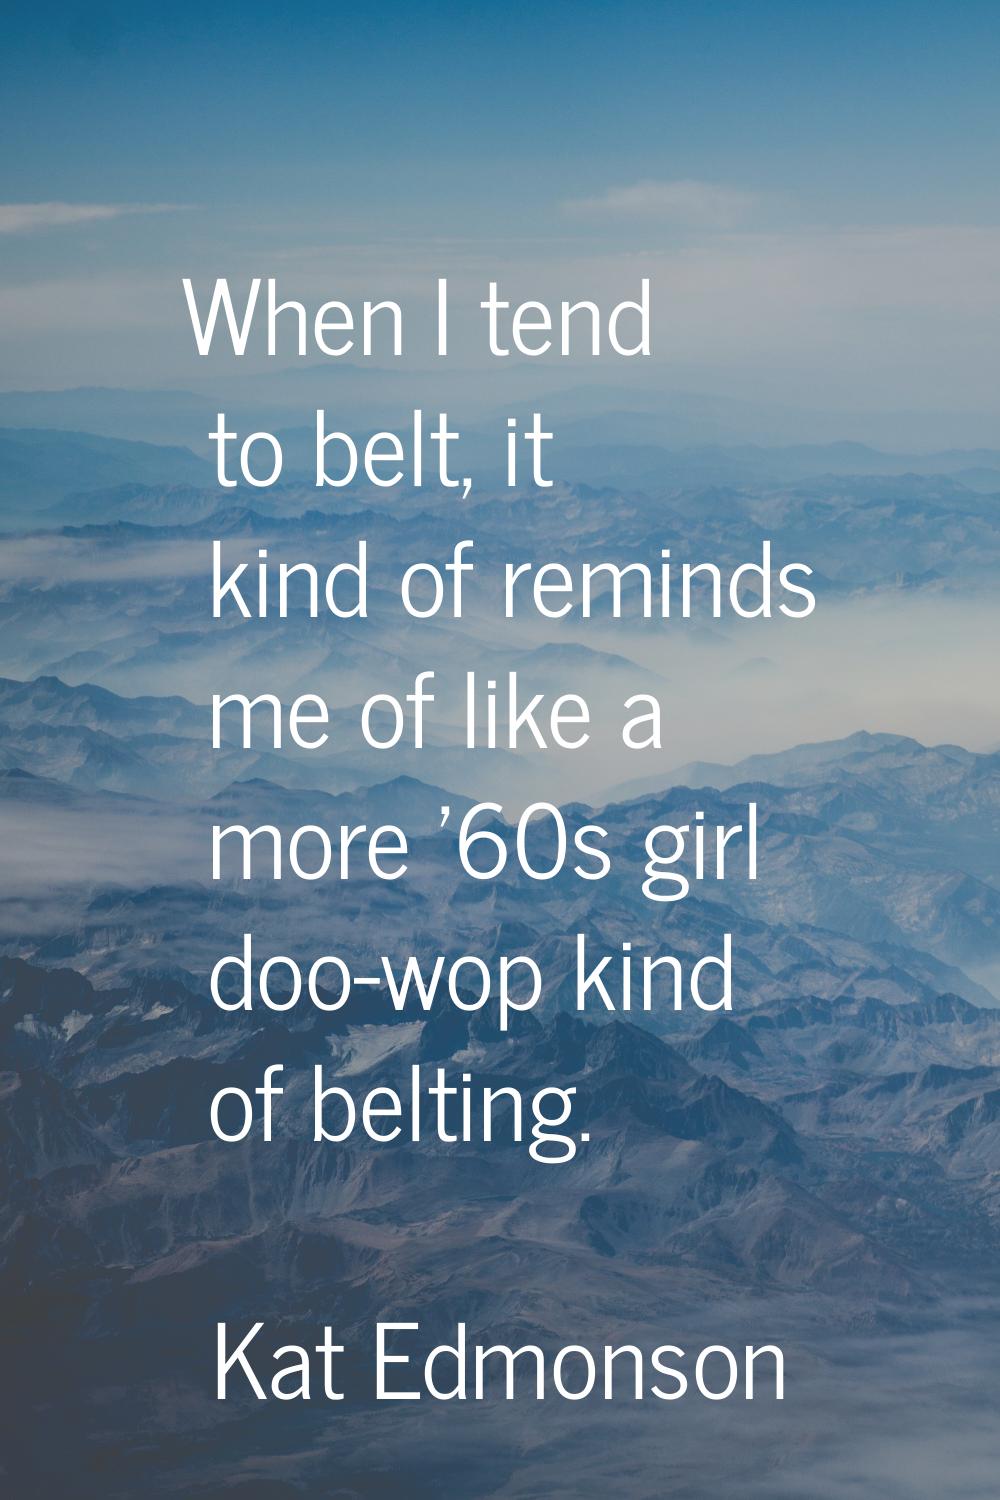 When I tend to belt, it kind of reminds me of like a more '60s girl doo-wop kind of belting.